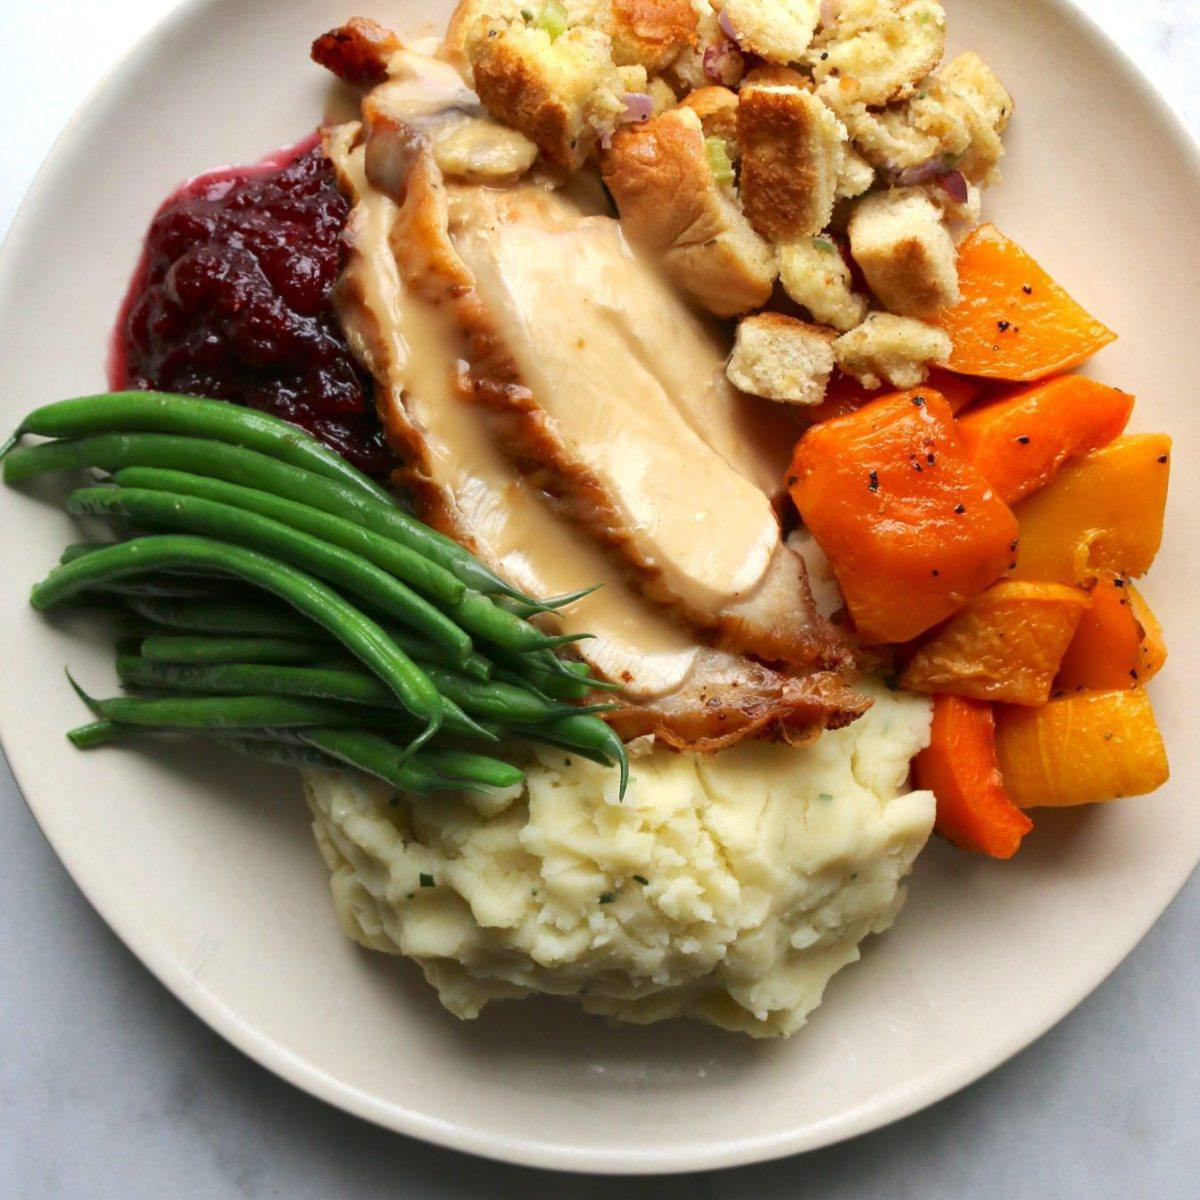 To Go Thanksgiving Dinners
 Where to Thanksgiving Dinner to go in Toronto 2017